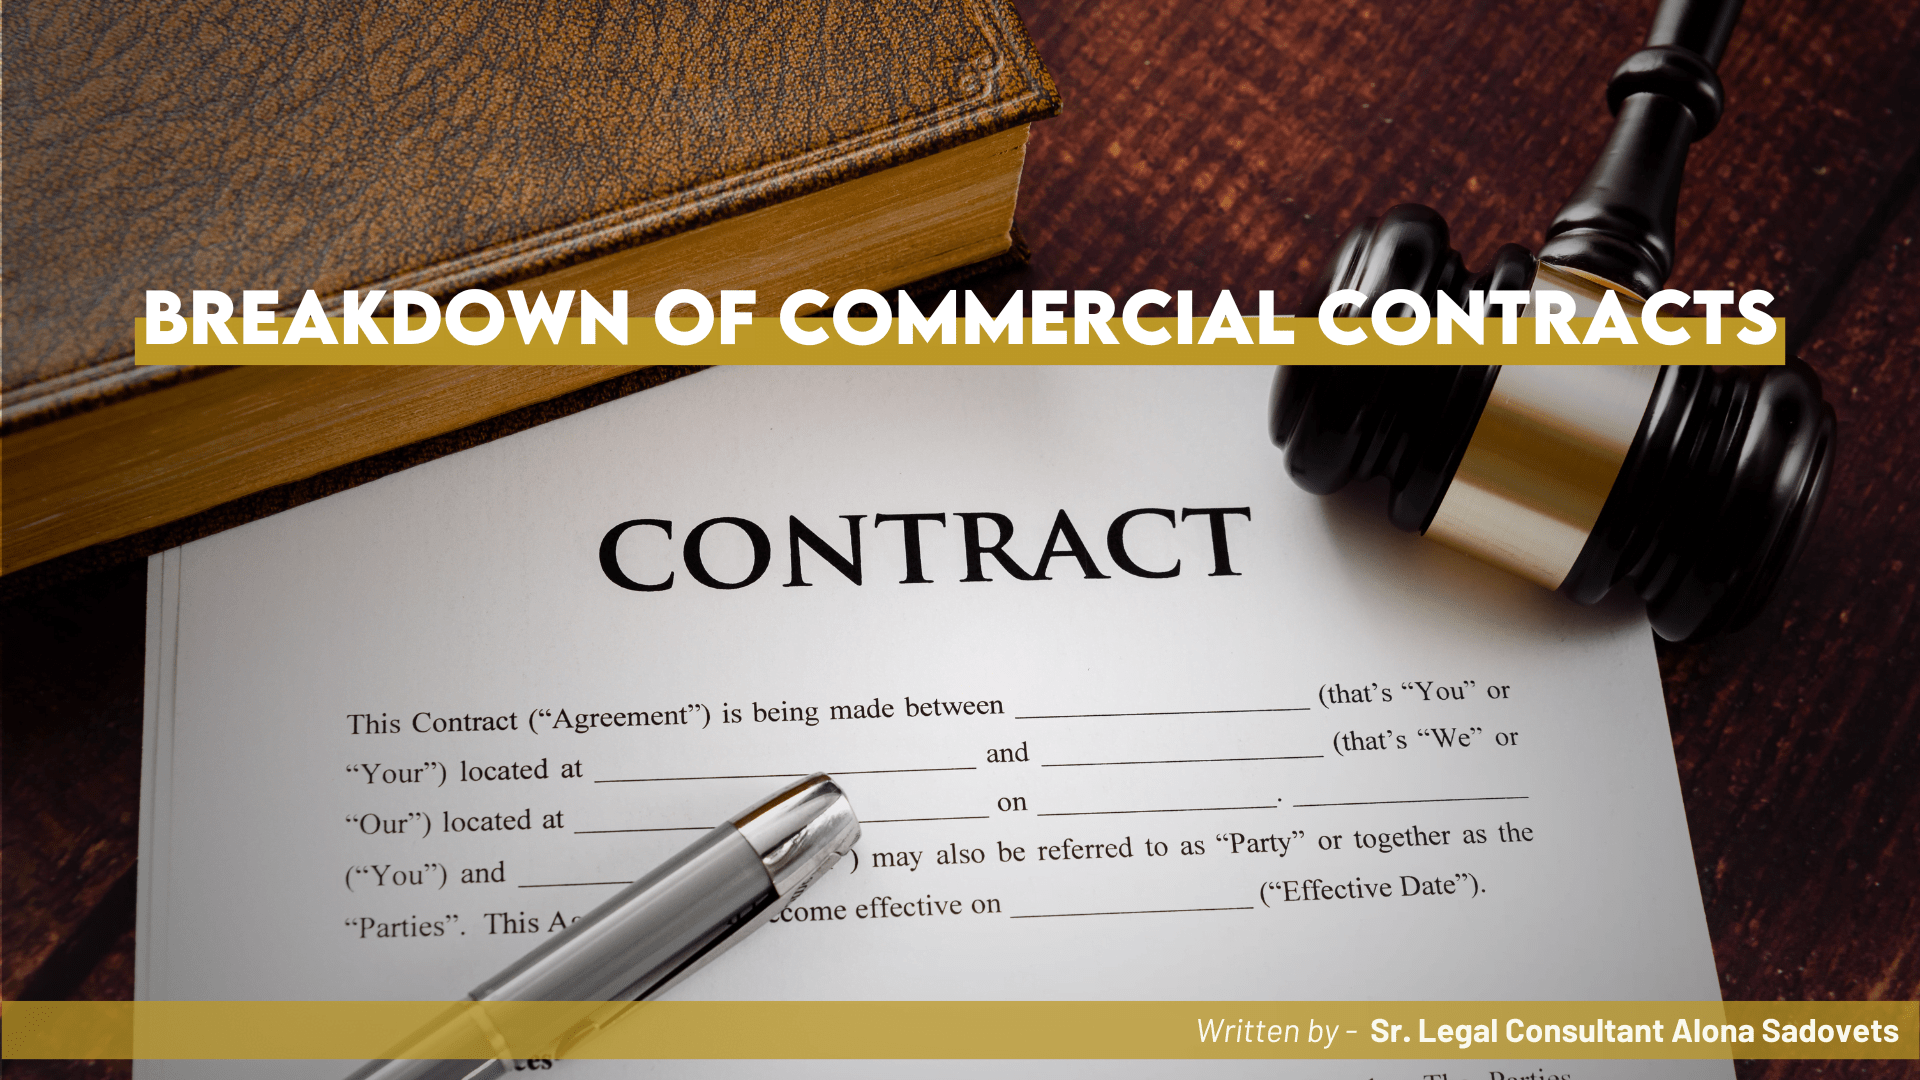 Breakdown of Commercial Contracts